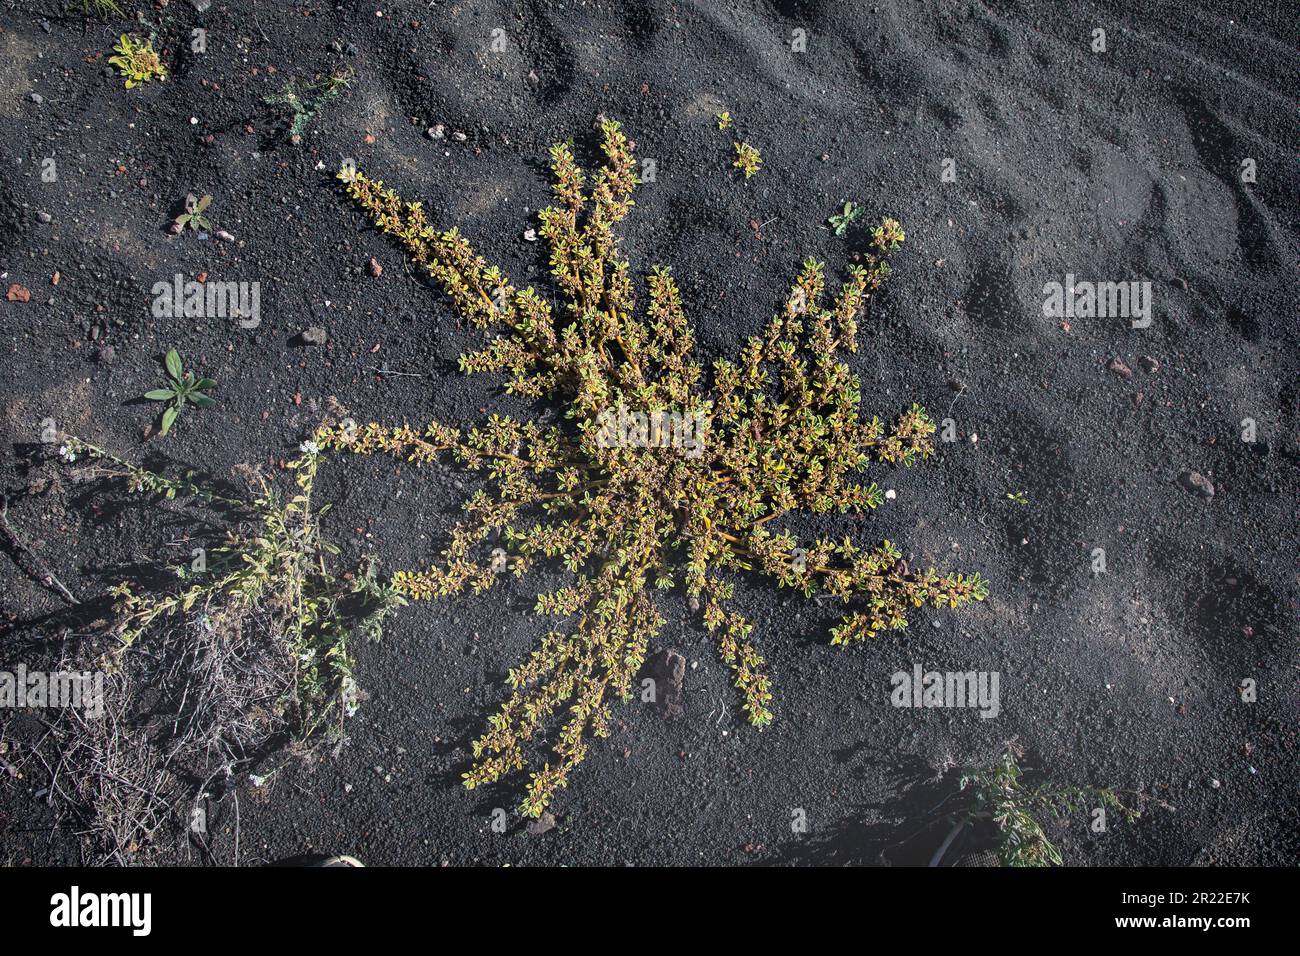 Canarian Iceplant, Canary Iceplant (Aizoon canariense, Aizoon canariensis), fruiting, Canary Islands, Lanzarote Stock Photo